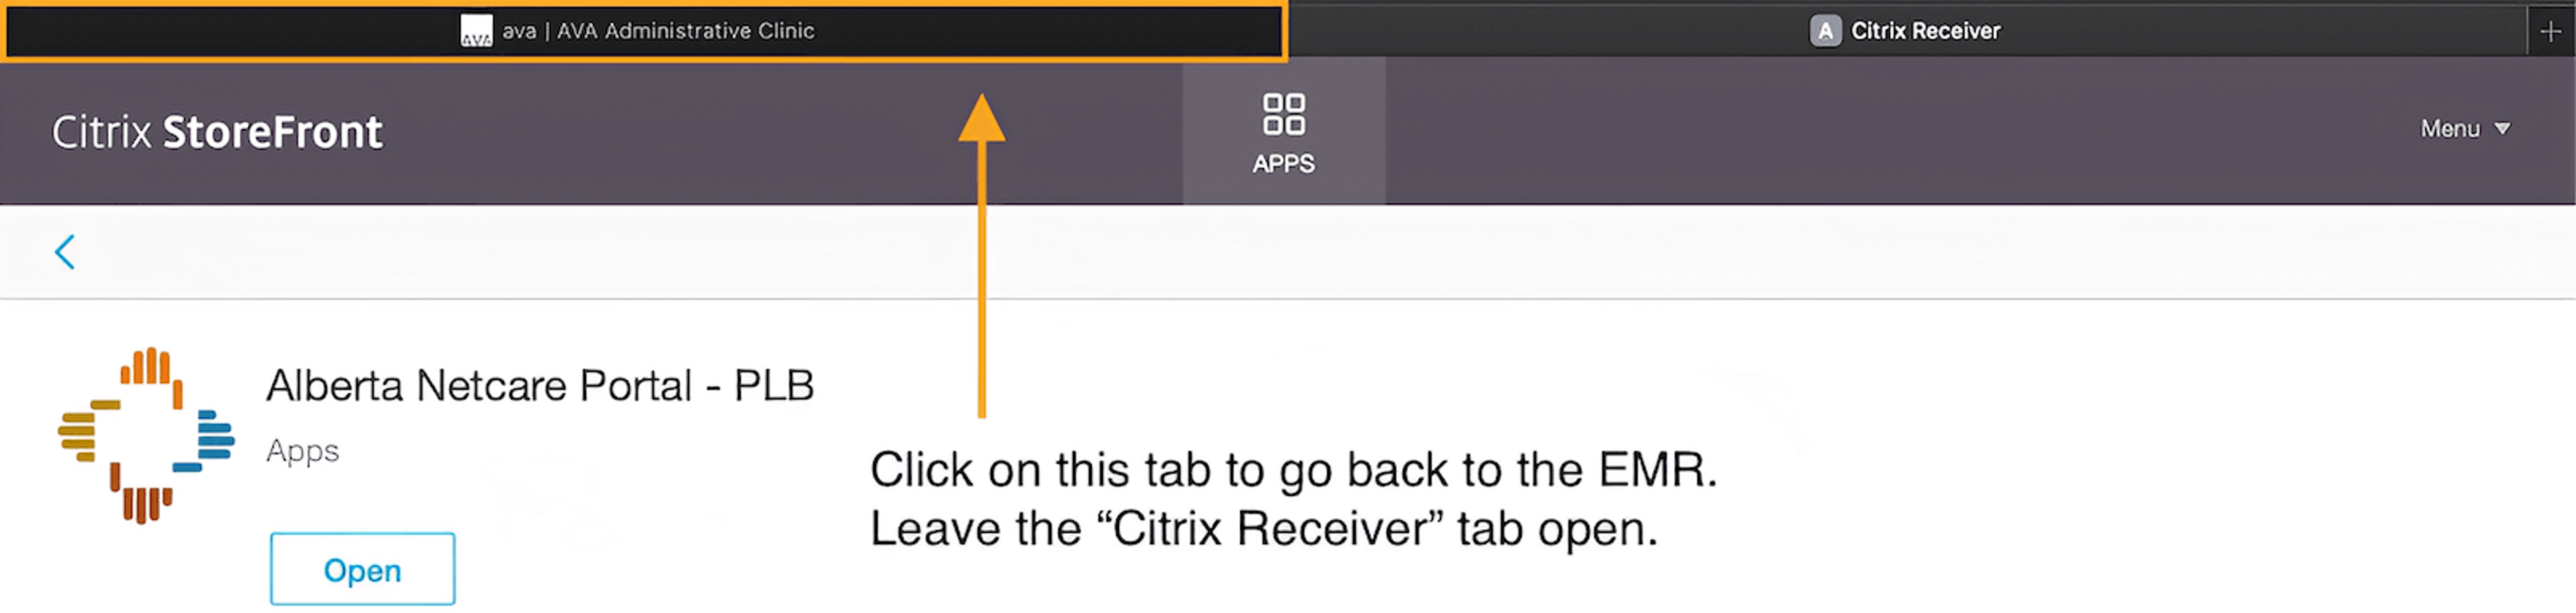 Citrix StoreFront with an orange arrow prompting the user to 'Click on this tab to go back to the EMR. Leave the "Citrix Receiver" tab open.